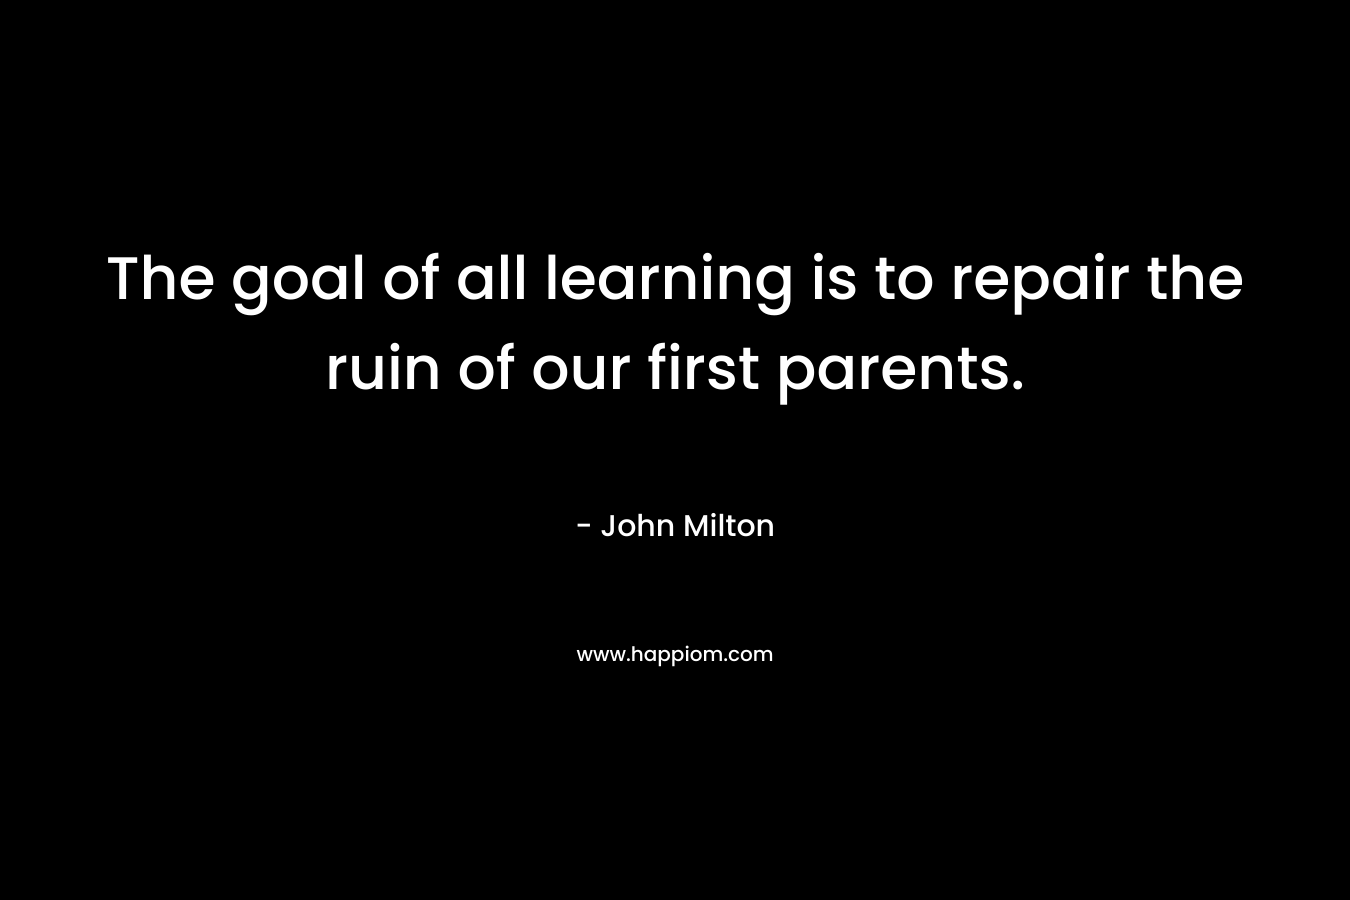 The goal of all learning is to repair the ruin of our first parents.